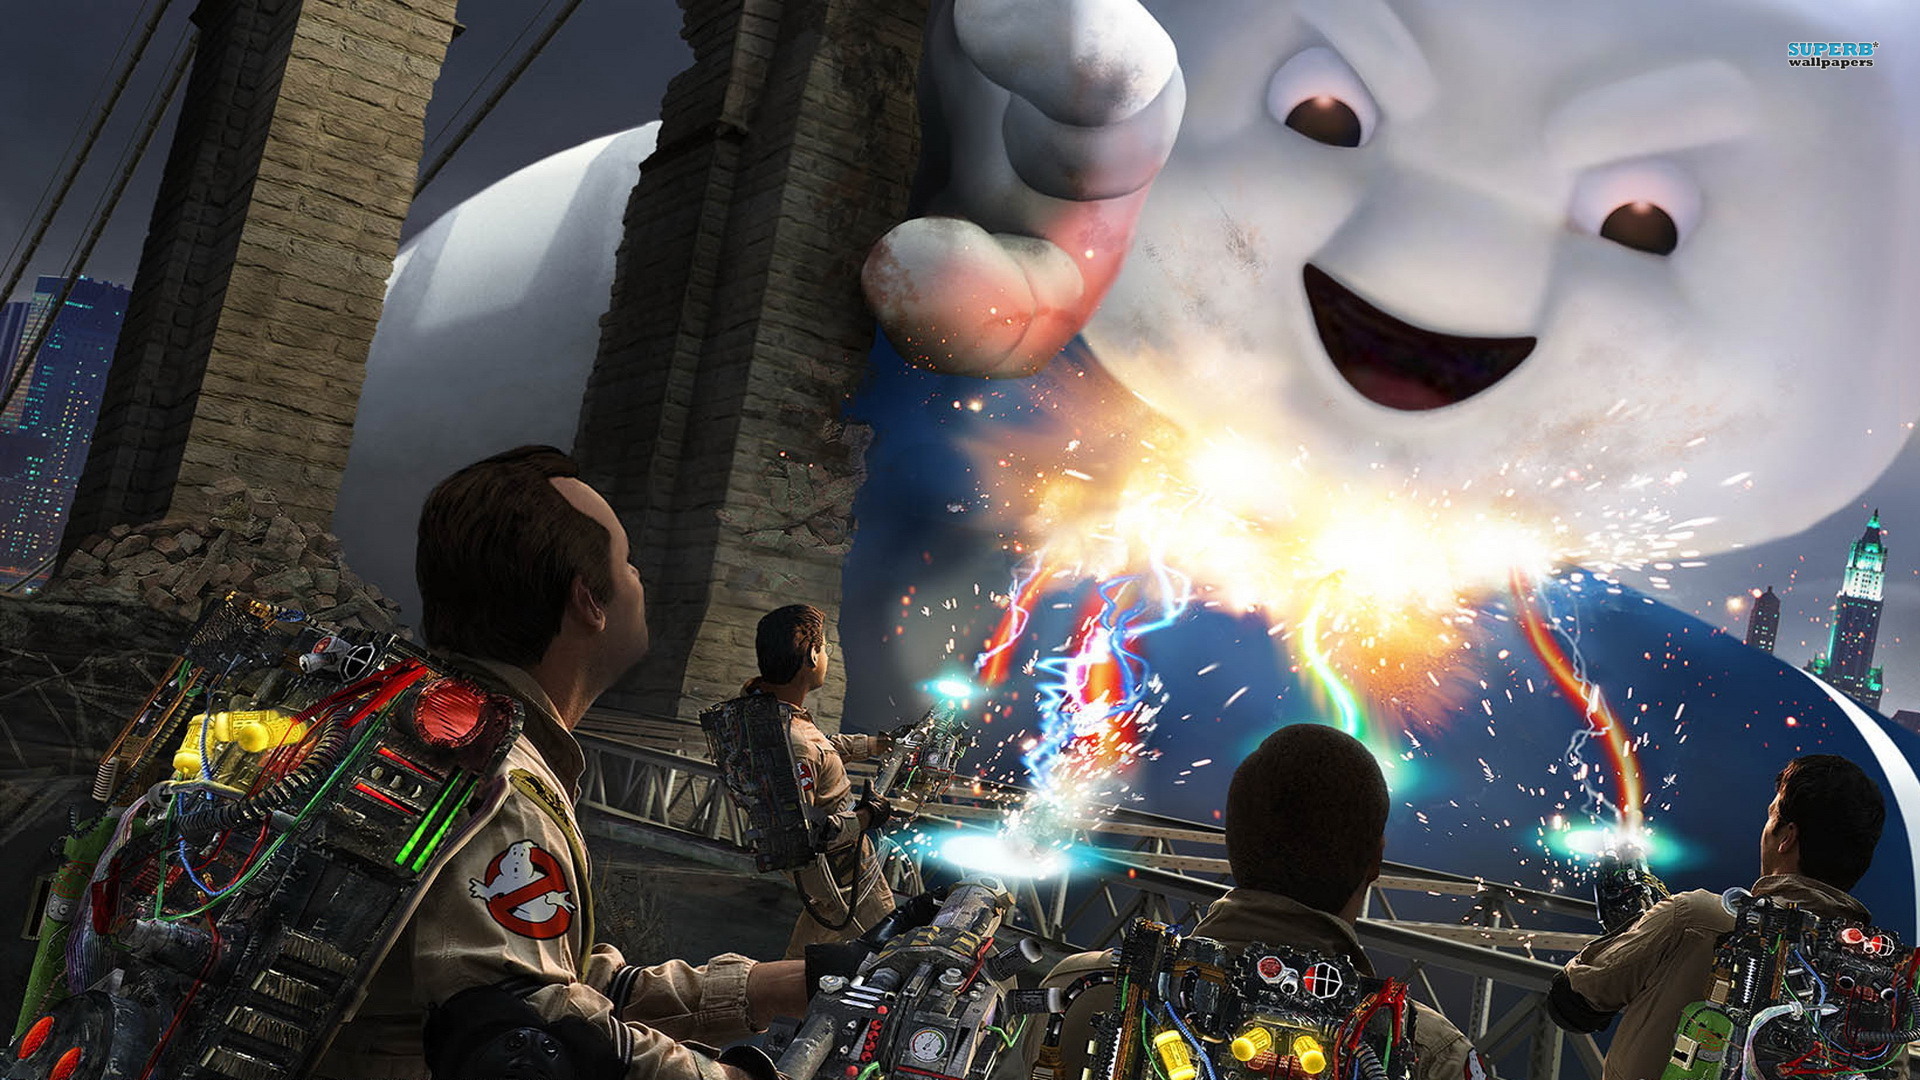 Cool Video Game Wallpaper Xghostbusters The